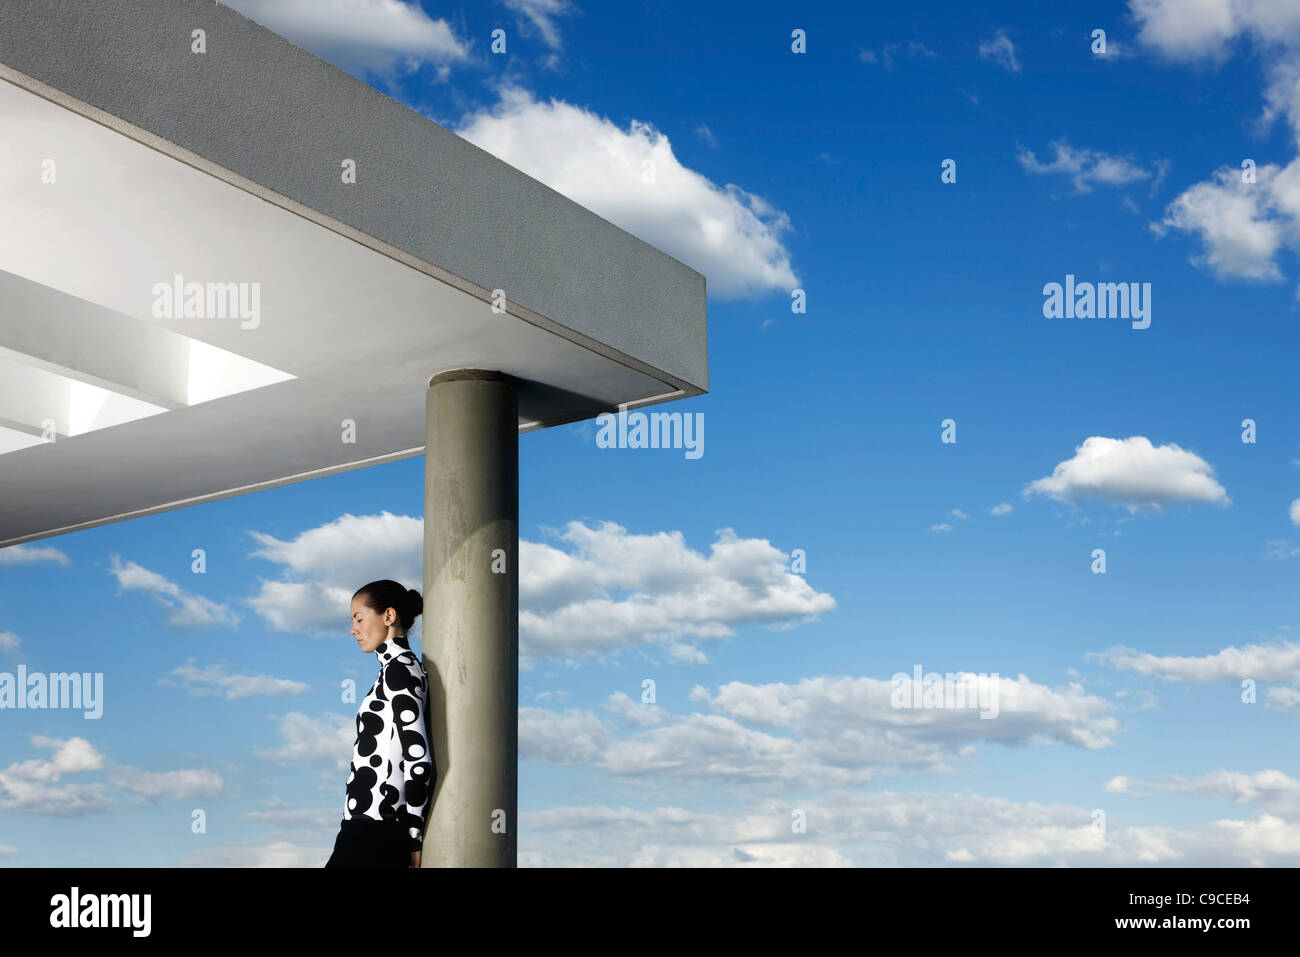 Fashionably dressed young woman leaning against portico column Stock Photo